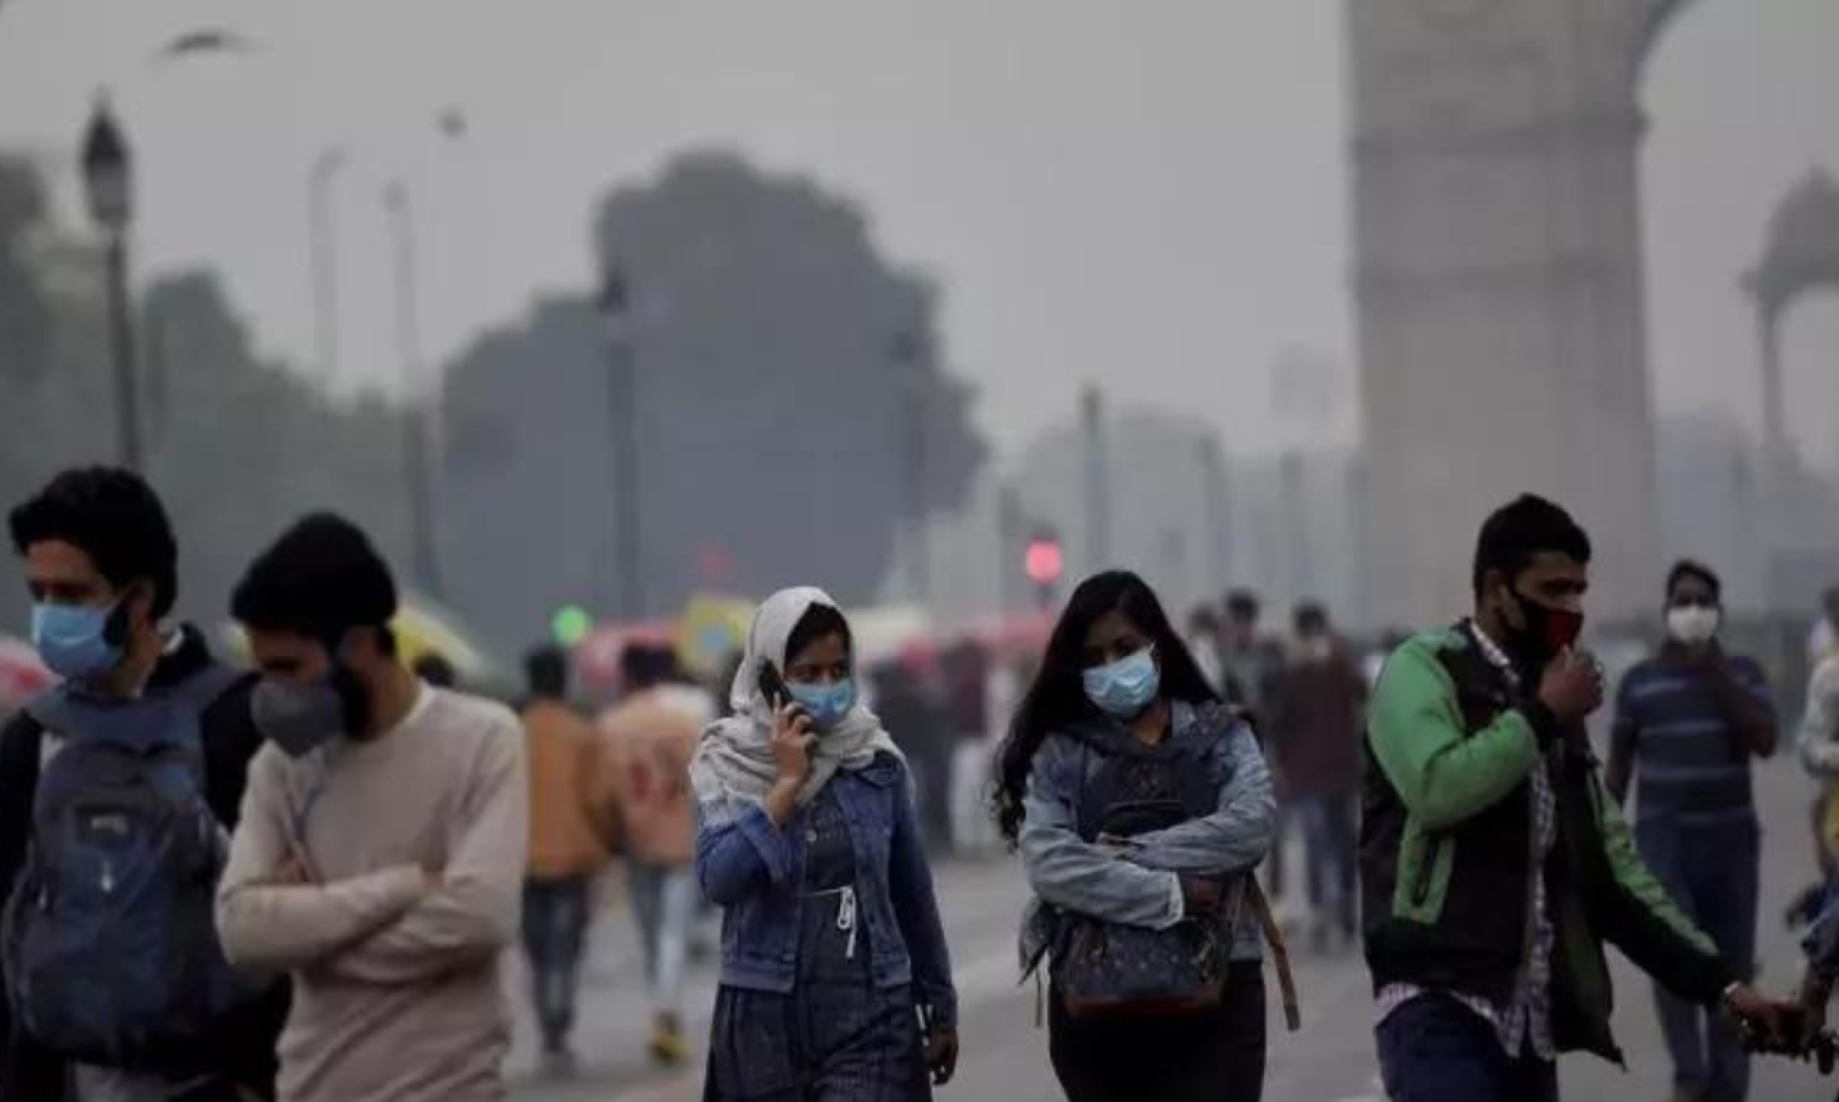 80 Percent Of Delhi Families Have Members Suffering From Air Pollution Ailments: Survey